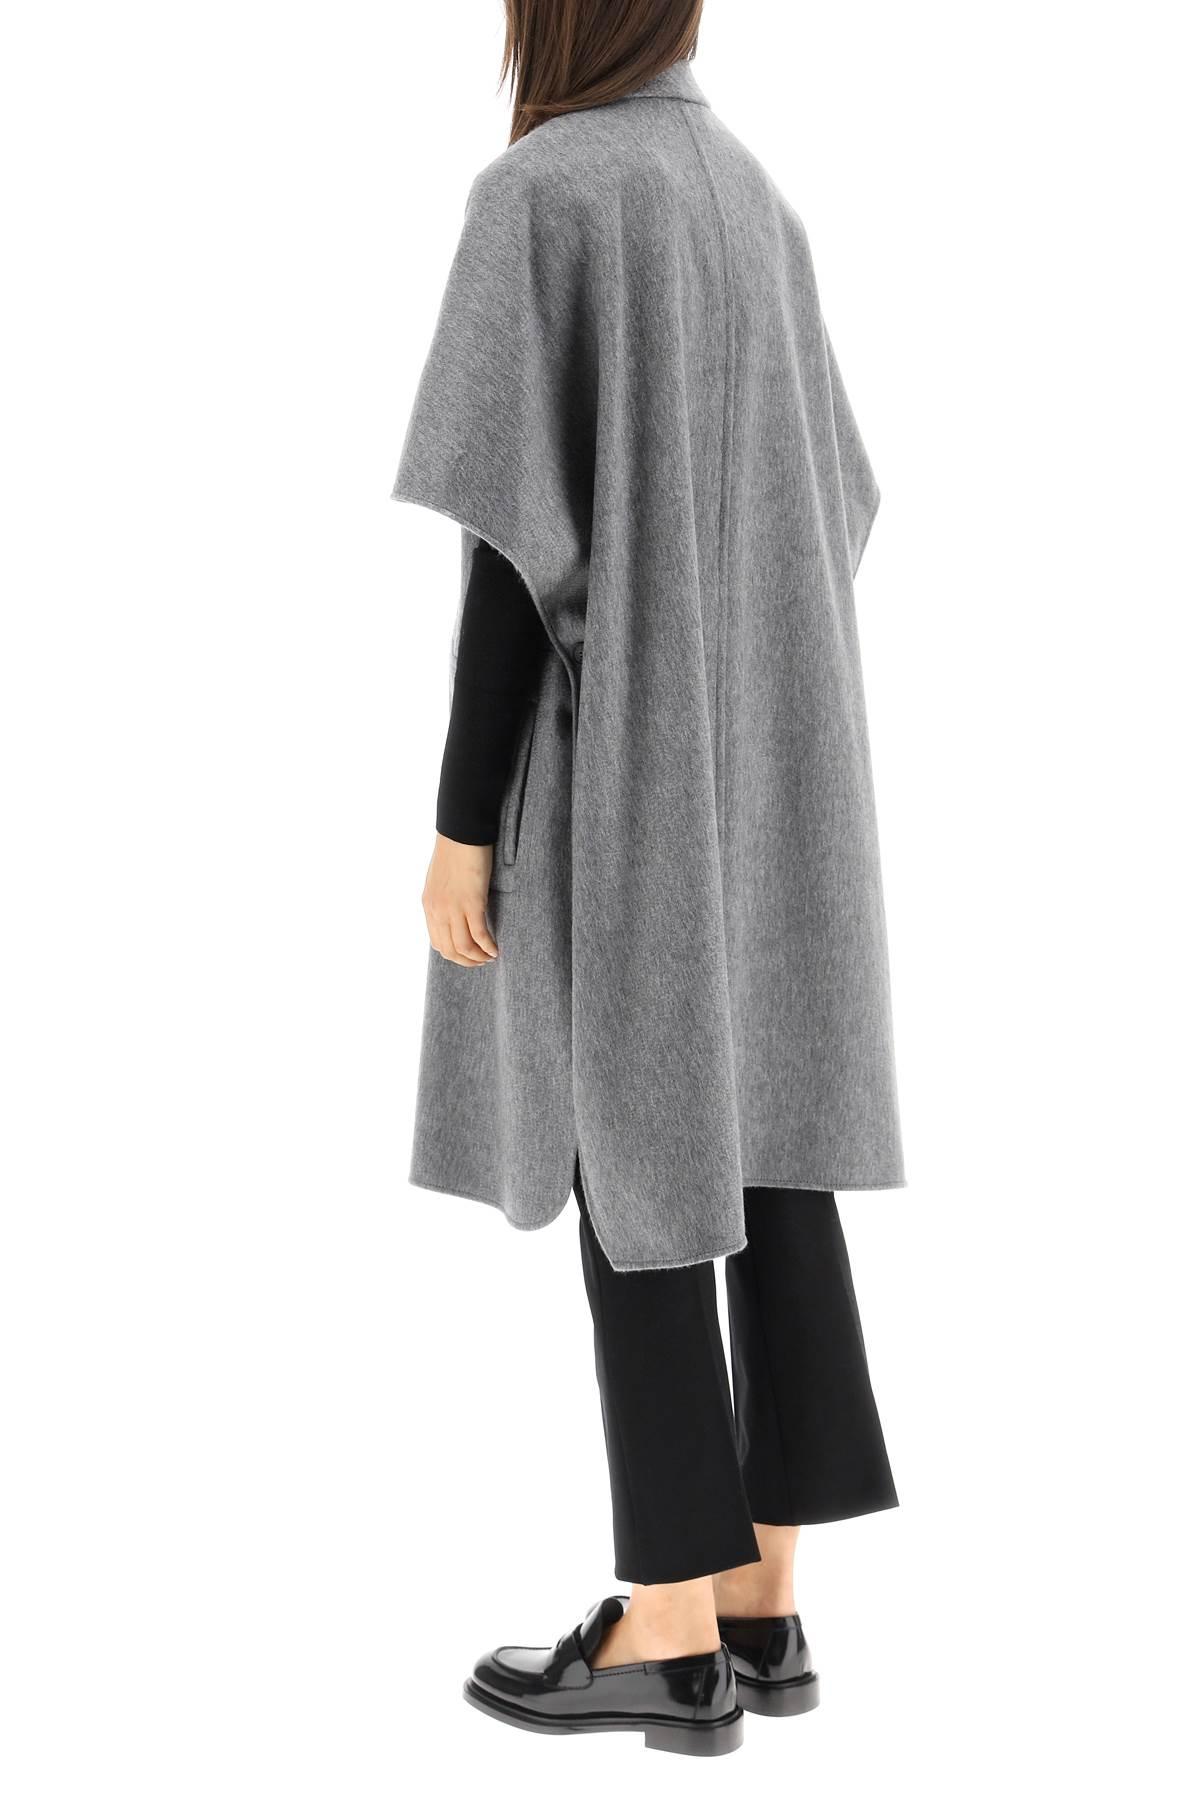 Max Mara Canapa Wool And Cashmere Cape in Grey (Gray) | Lyst